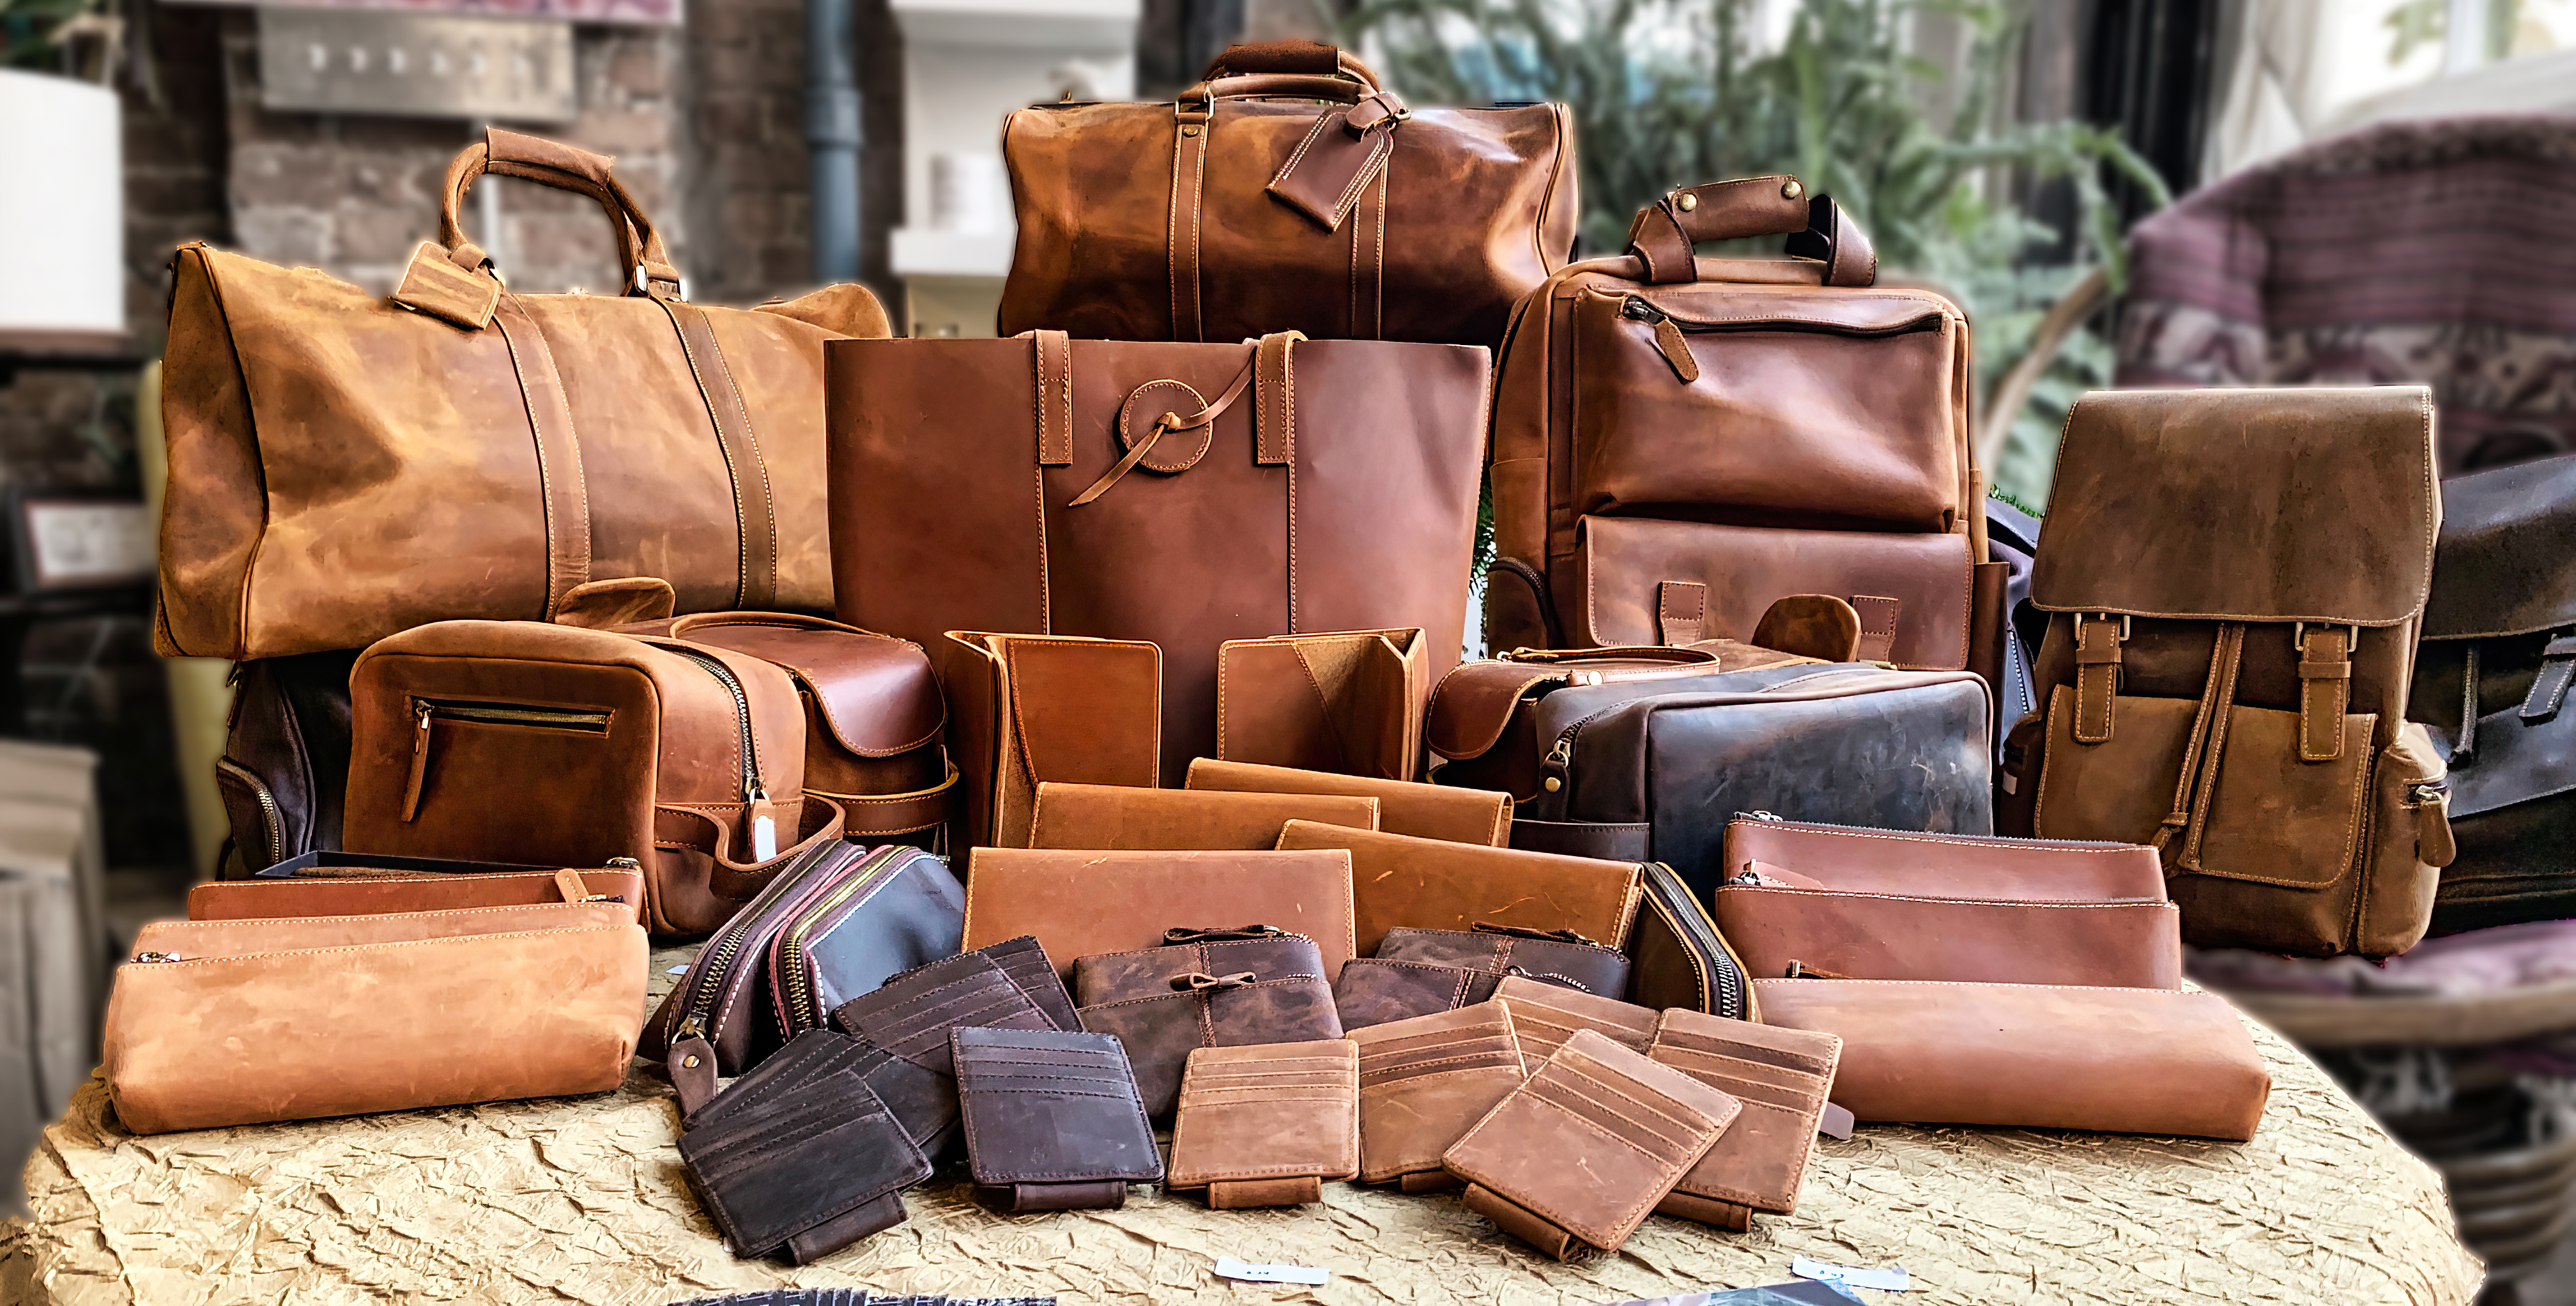 Leather Travel Accessories: How to Choose the Best Ones for Your Busin